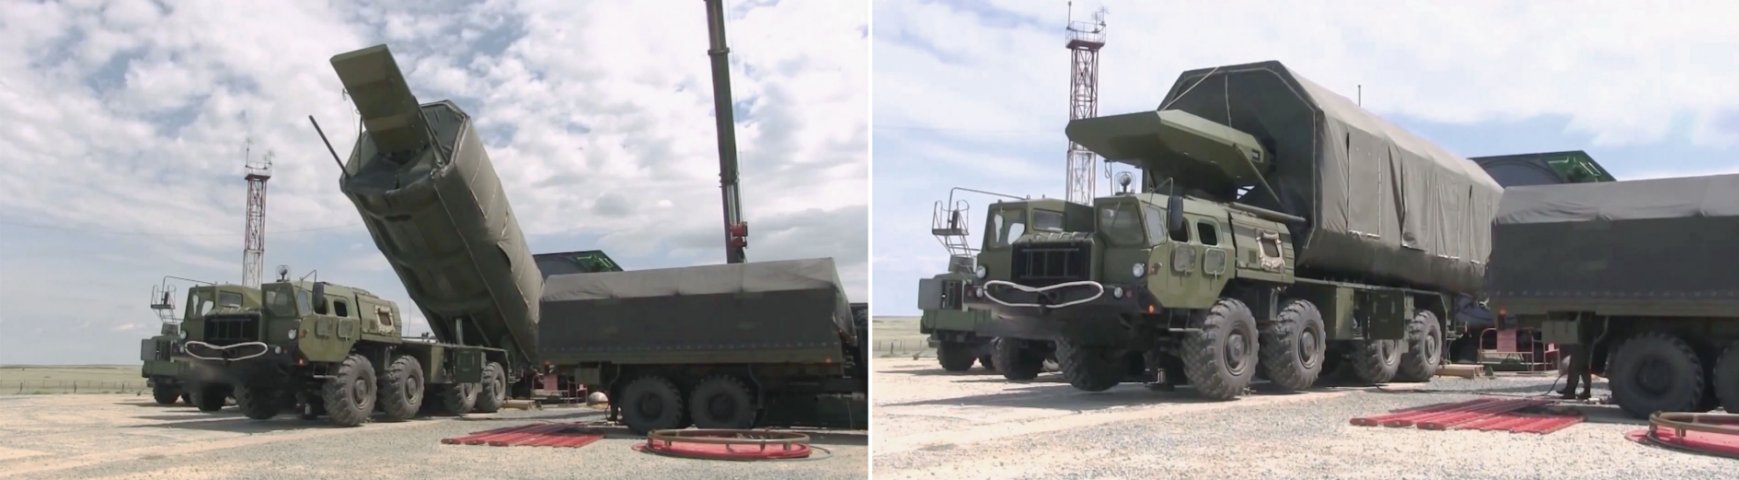 An UR-100N UTTH ICBM system equipped with the Avangard HGV before installation into a silo launcher. (Russian MoD )